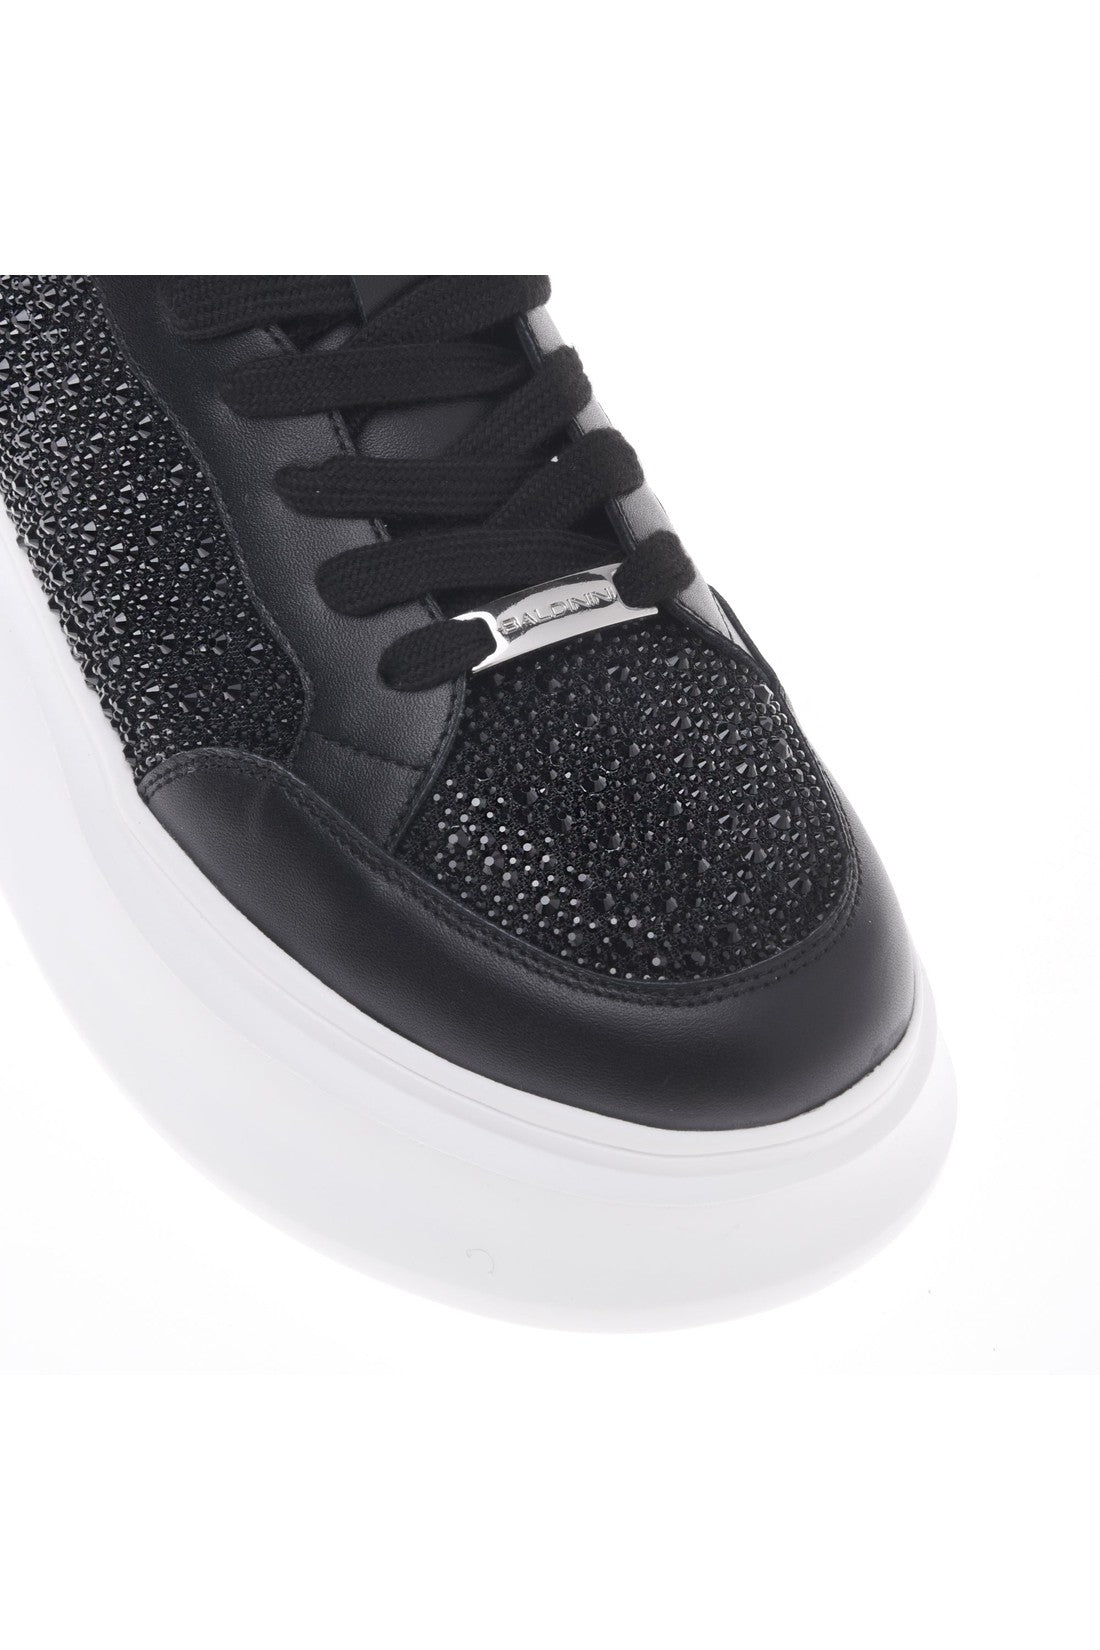 BALDININI-OUTLET-SALE-Sneaker-in-black-calfskin-with-rhinestones-Sneaker-ARCHIVE-COLLECTION-4.jpg